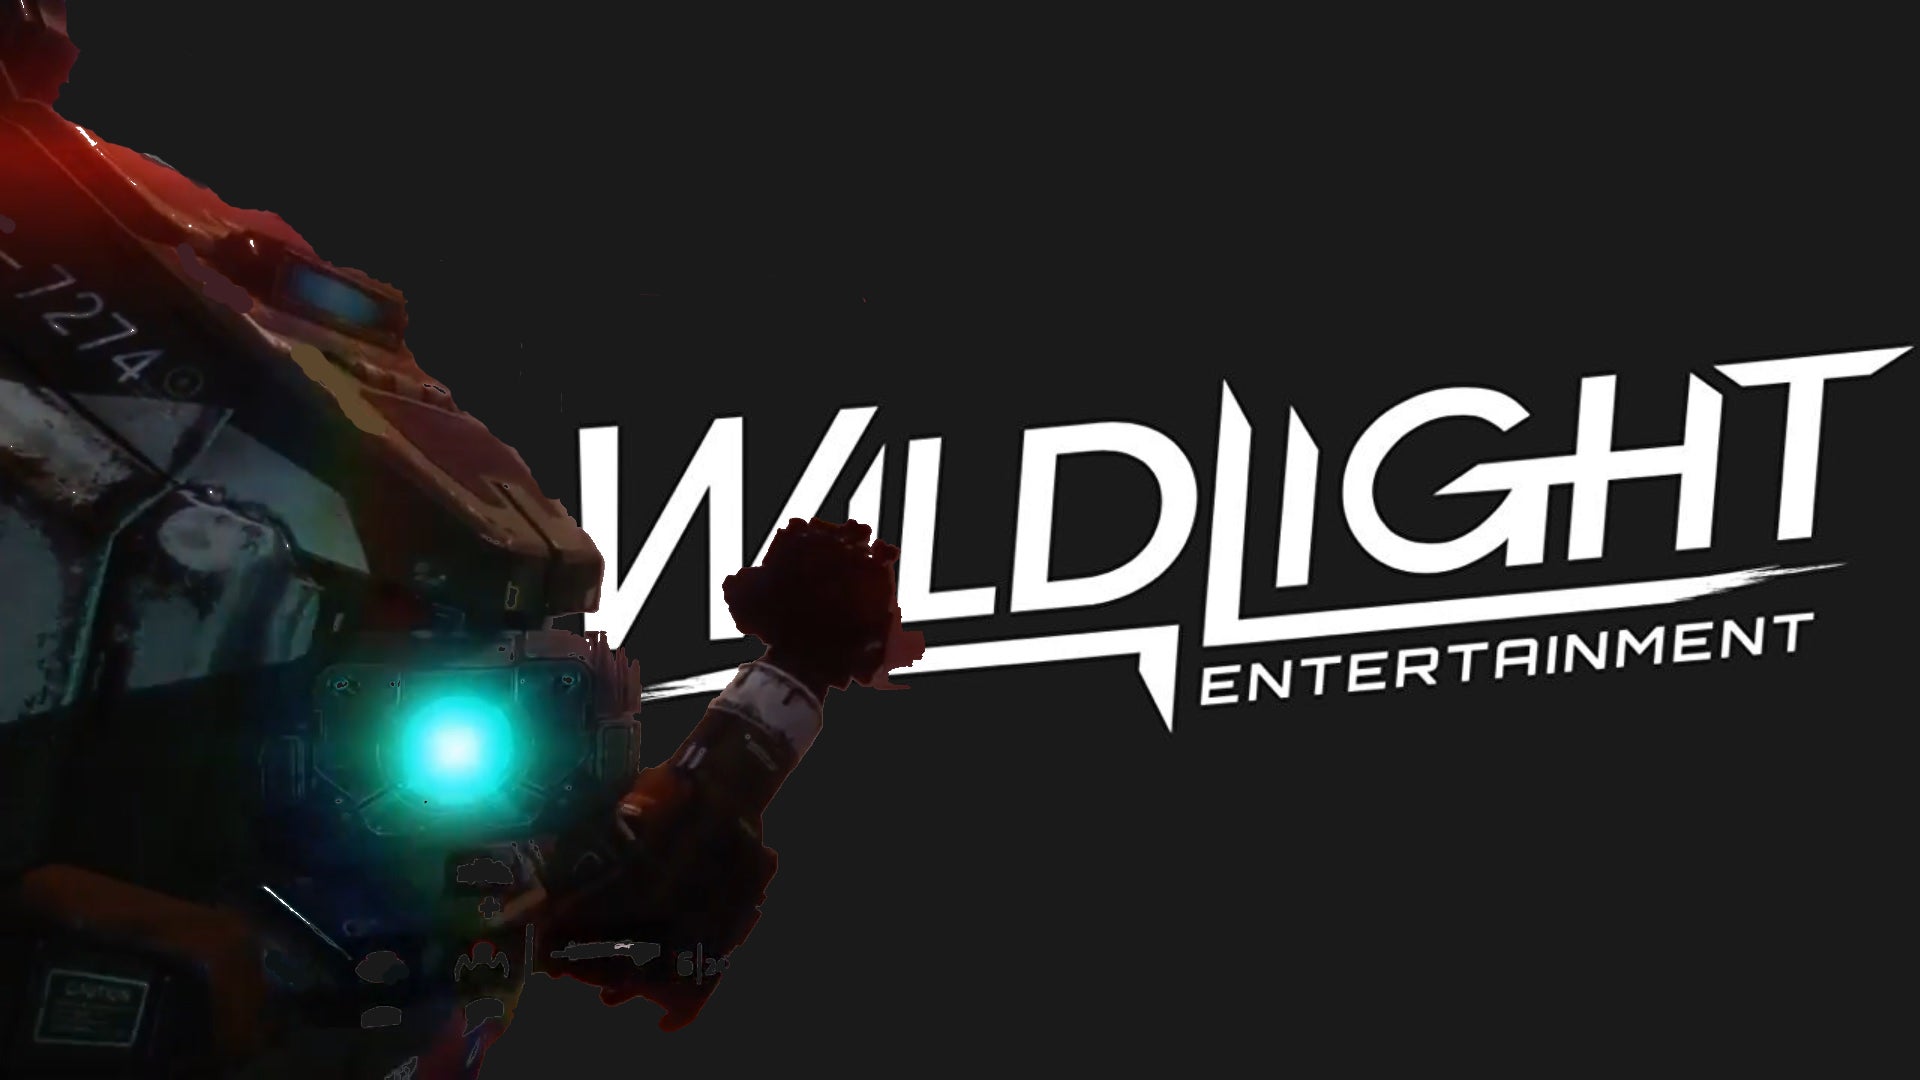 Custom header with BT Fastball special from Titanfall 2 into Wildlight entertainment logo